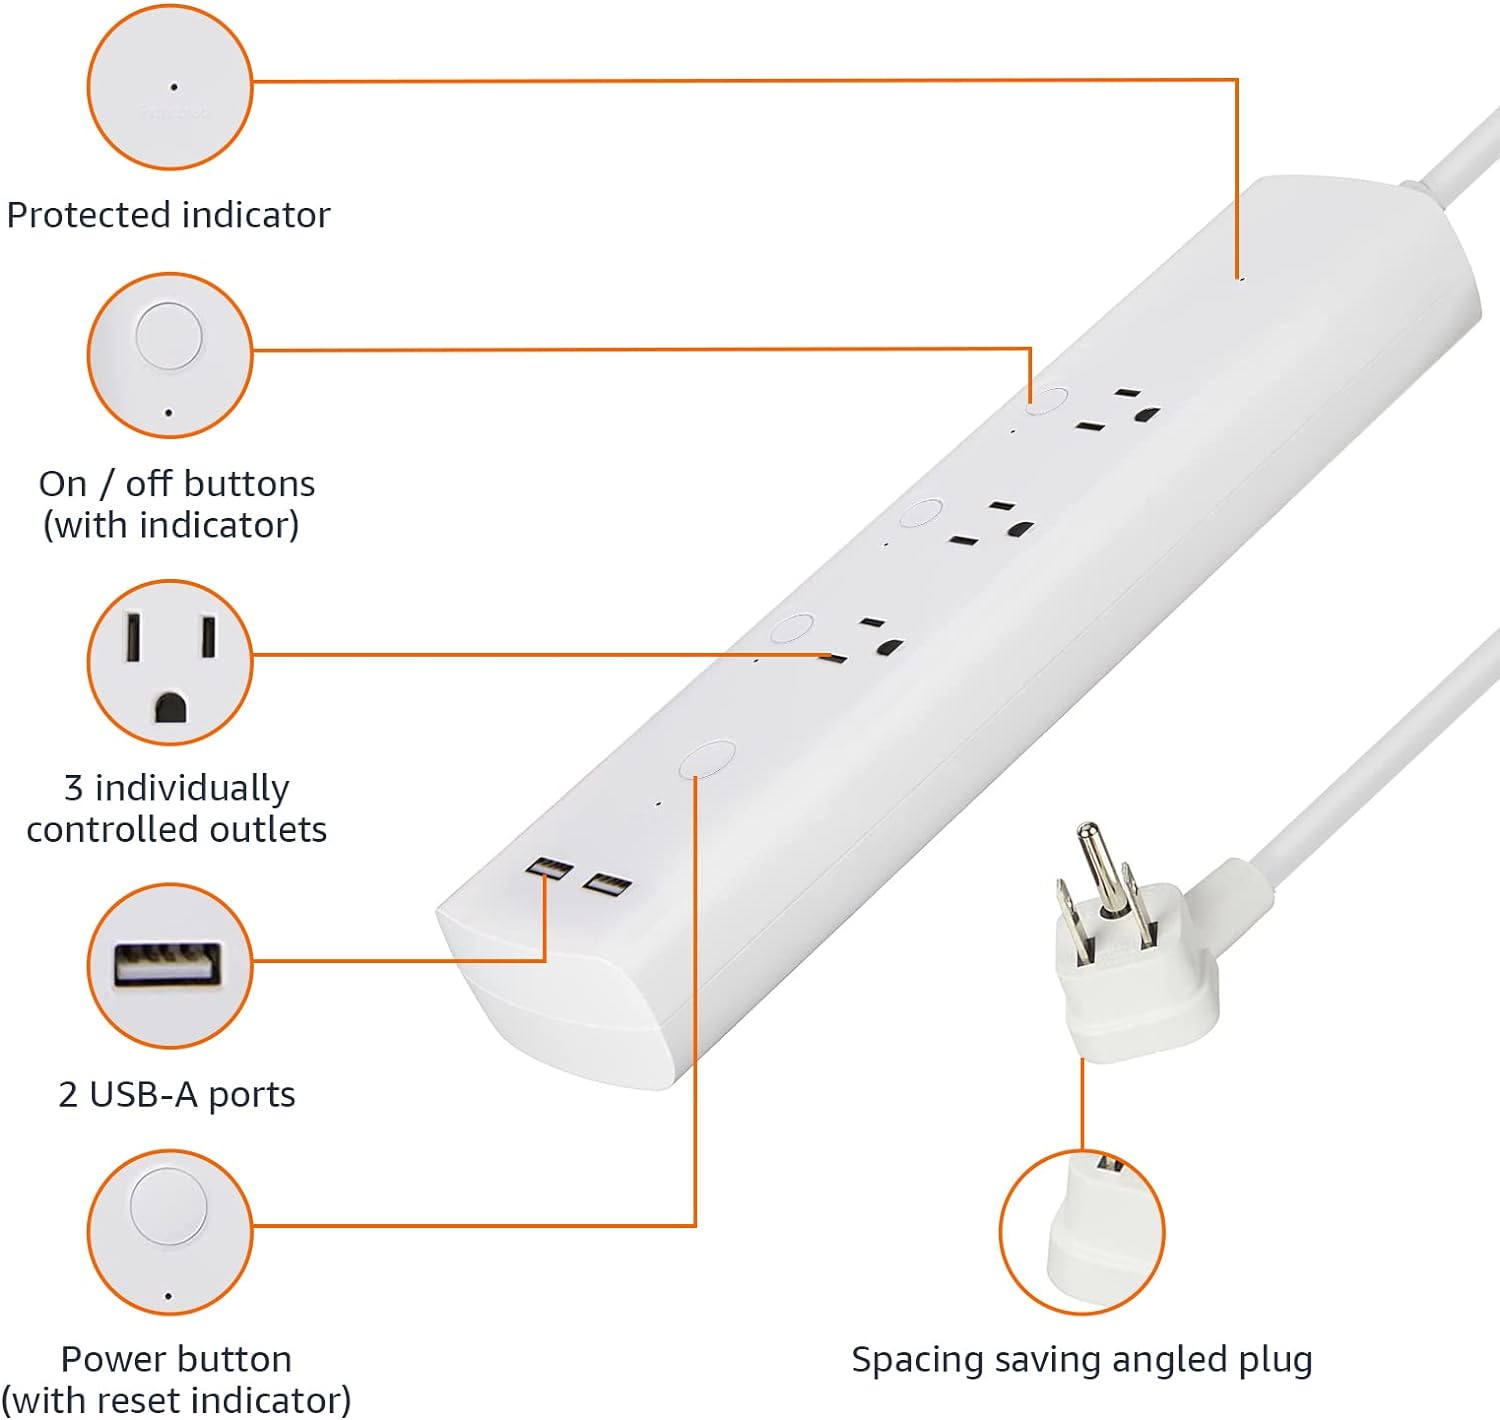 Amazon Basics Rectangular Smart Plug Power Strip, Surge Protector with 3 Individually Controlled Smart Outlets and 2 USB Ports, 2.4 GHz Wi-Fi, Works with Alexa, White, 11.02 x 2.56 x 1.38 in